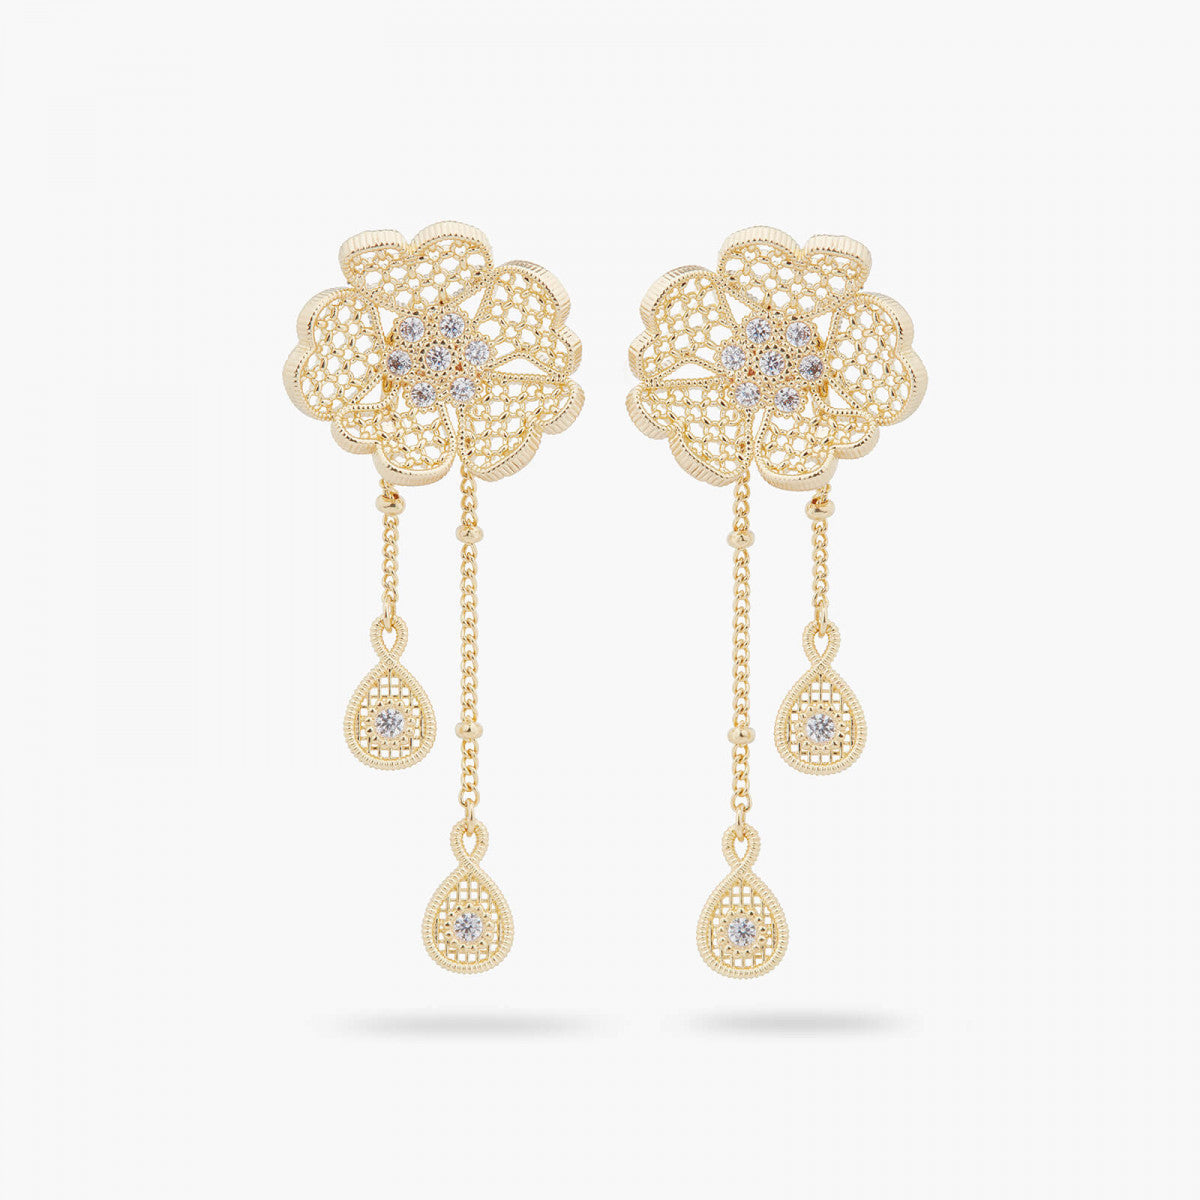 GOLD THREAD TWO-IN-ONE POST EARRINGS